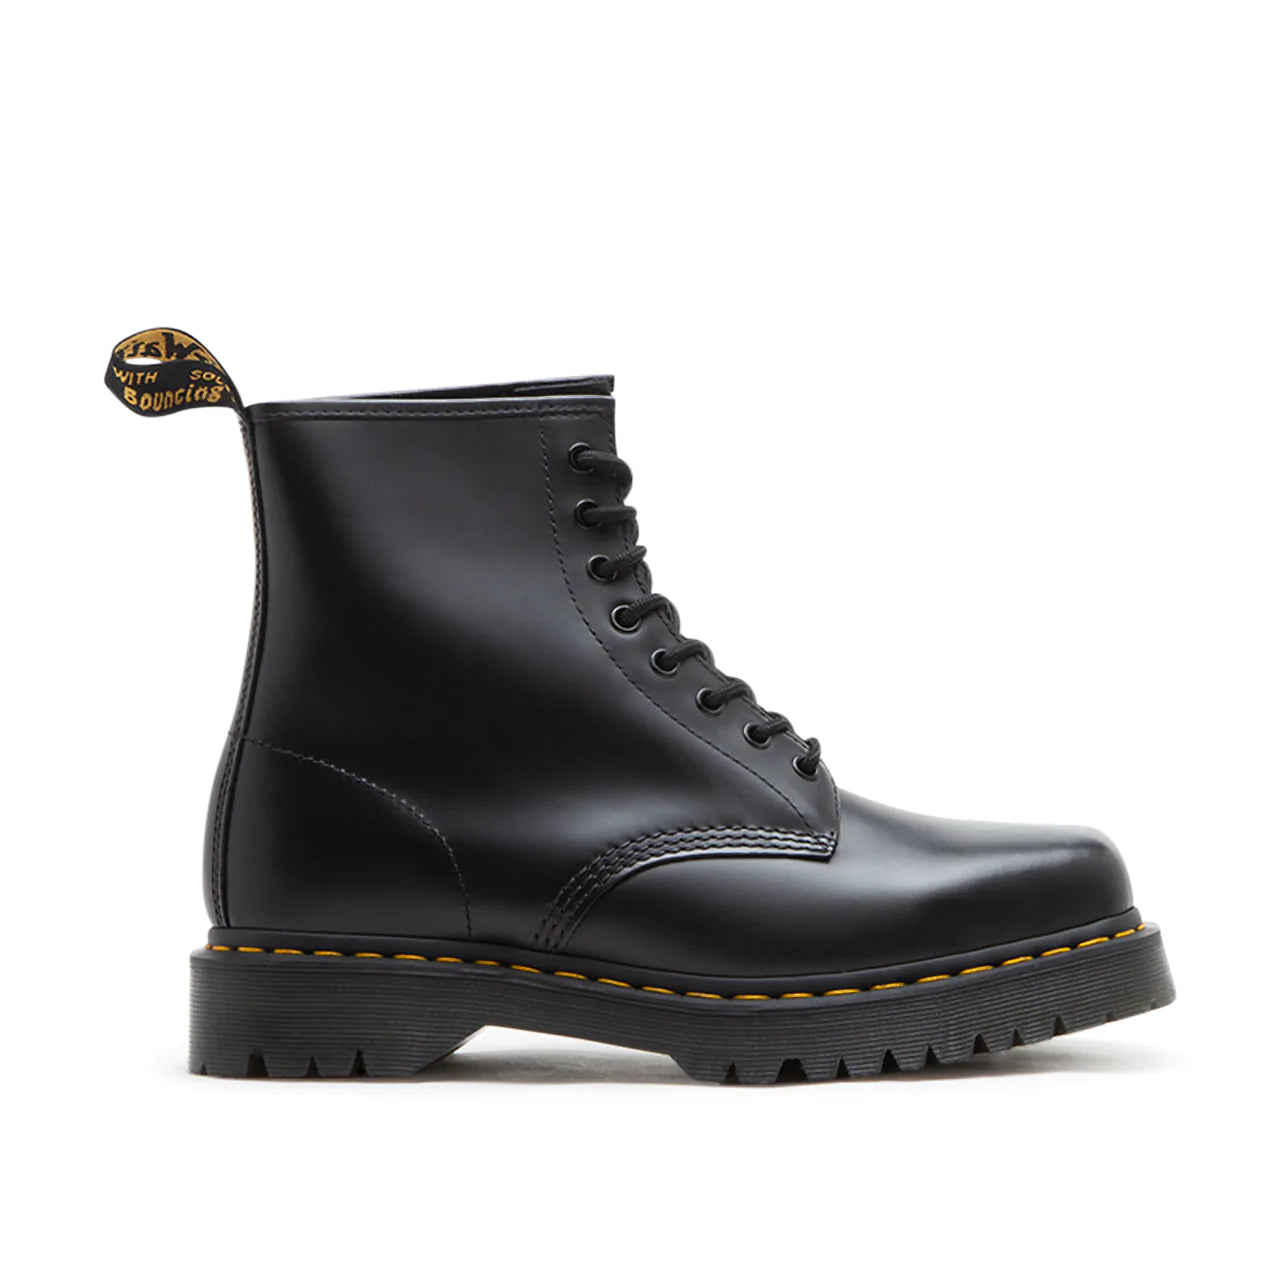 Dr. Martens 1460 Bex Squared Toe Leather Lace Up Boots (Schwarz)  - Allike Store